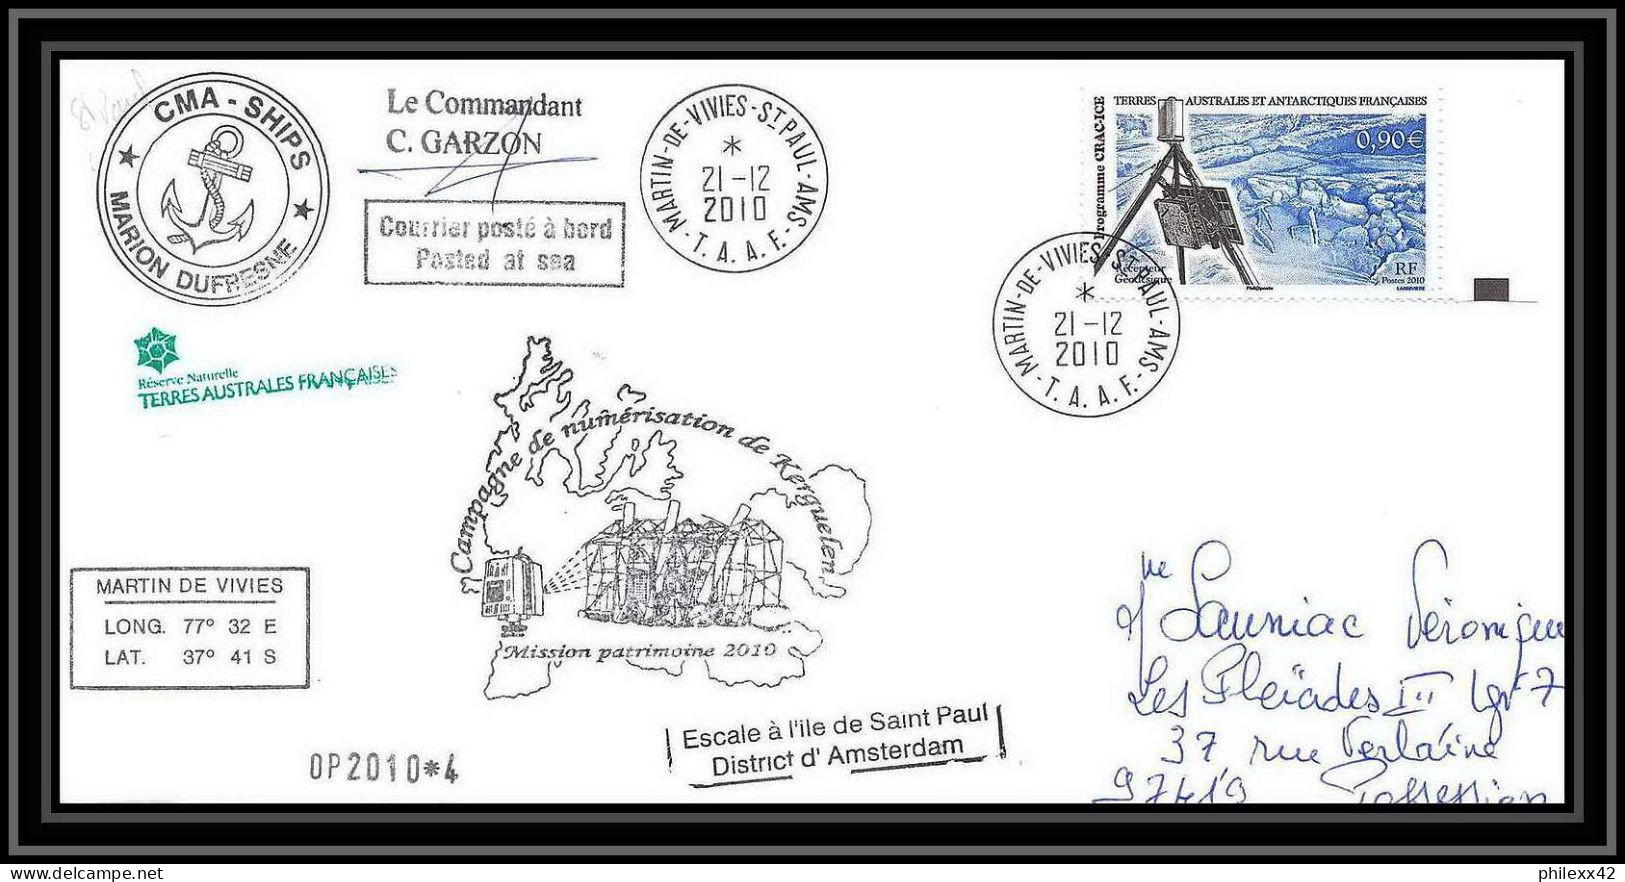 3062 Helilagon Dufresne Signé Signed Op 2010/4 St Paul 21/12/2010 N°559 ANTARCTIC Terres Australes (taaf) Lettre Cover - Helicopters